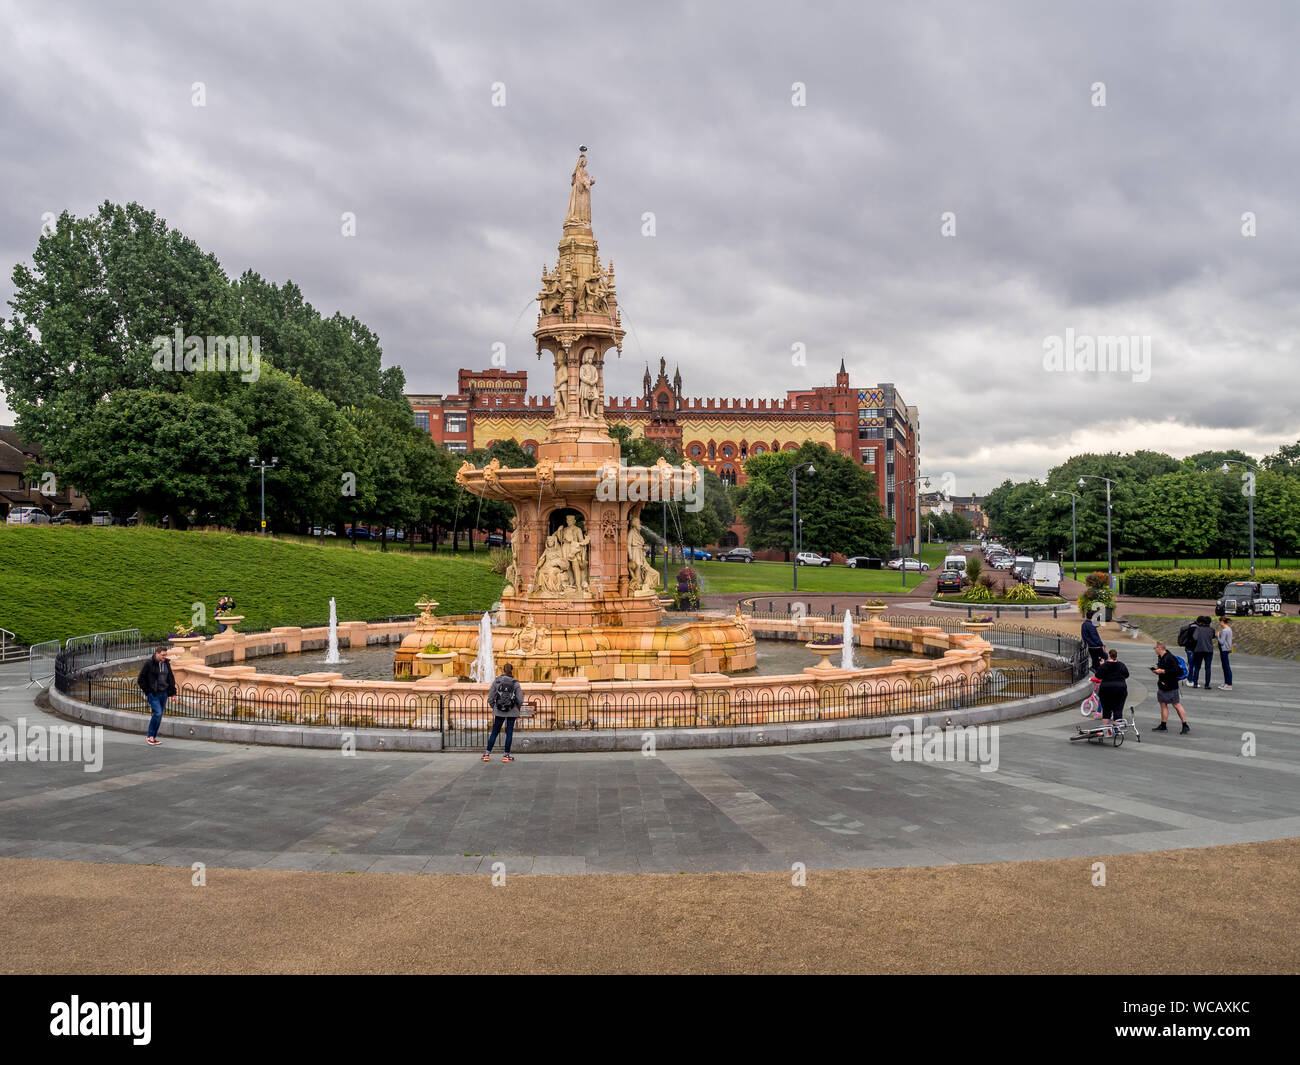 The Doulton Fountain on July 21, 2017 in Glasgow, Scotland. It was built in 1888 located near the People's Palace museum. The Templeton Carpet factory Stock Photo